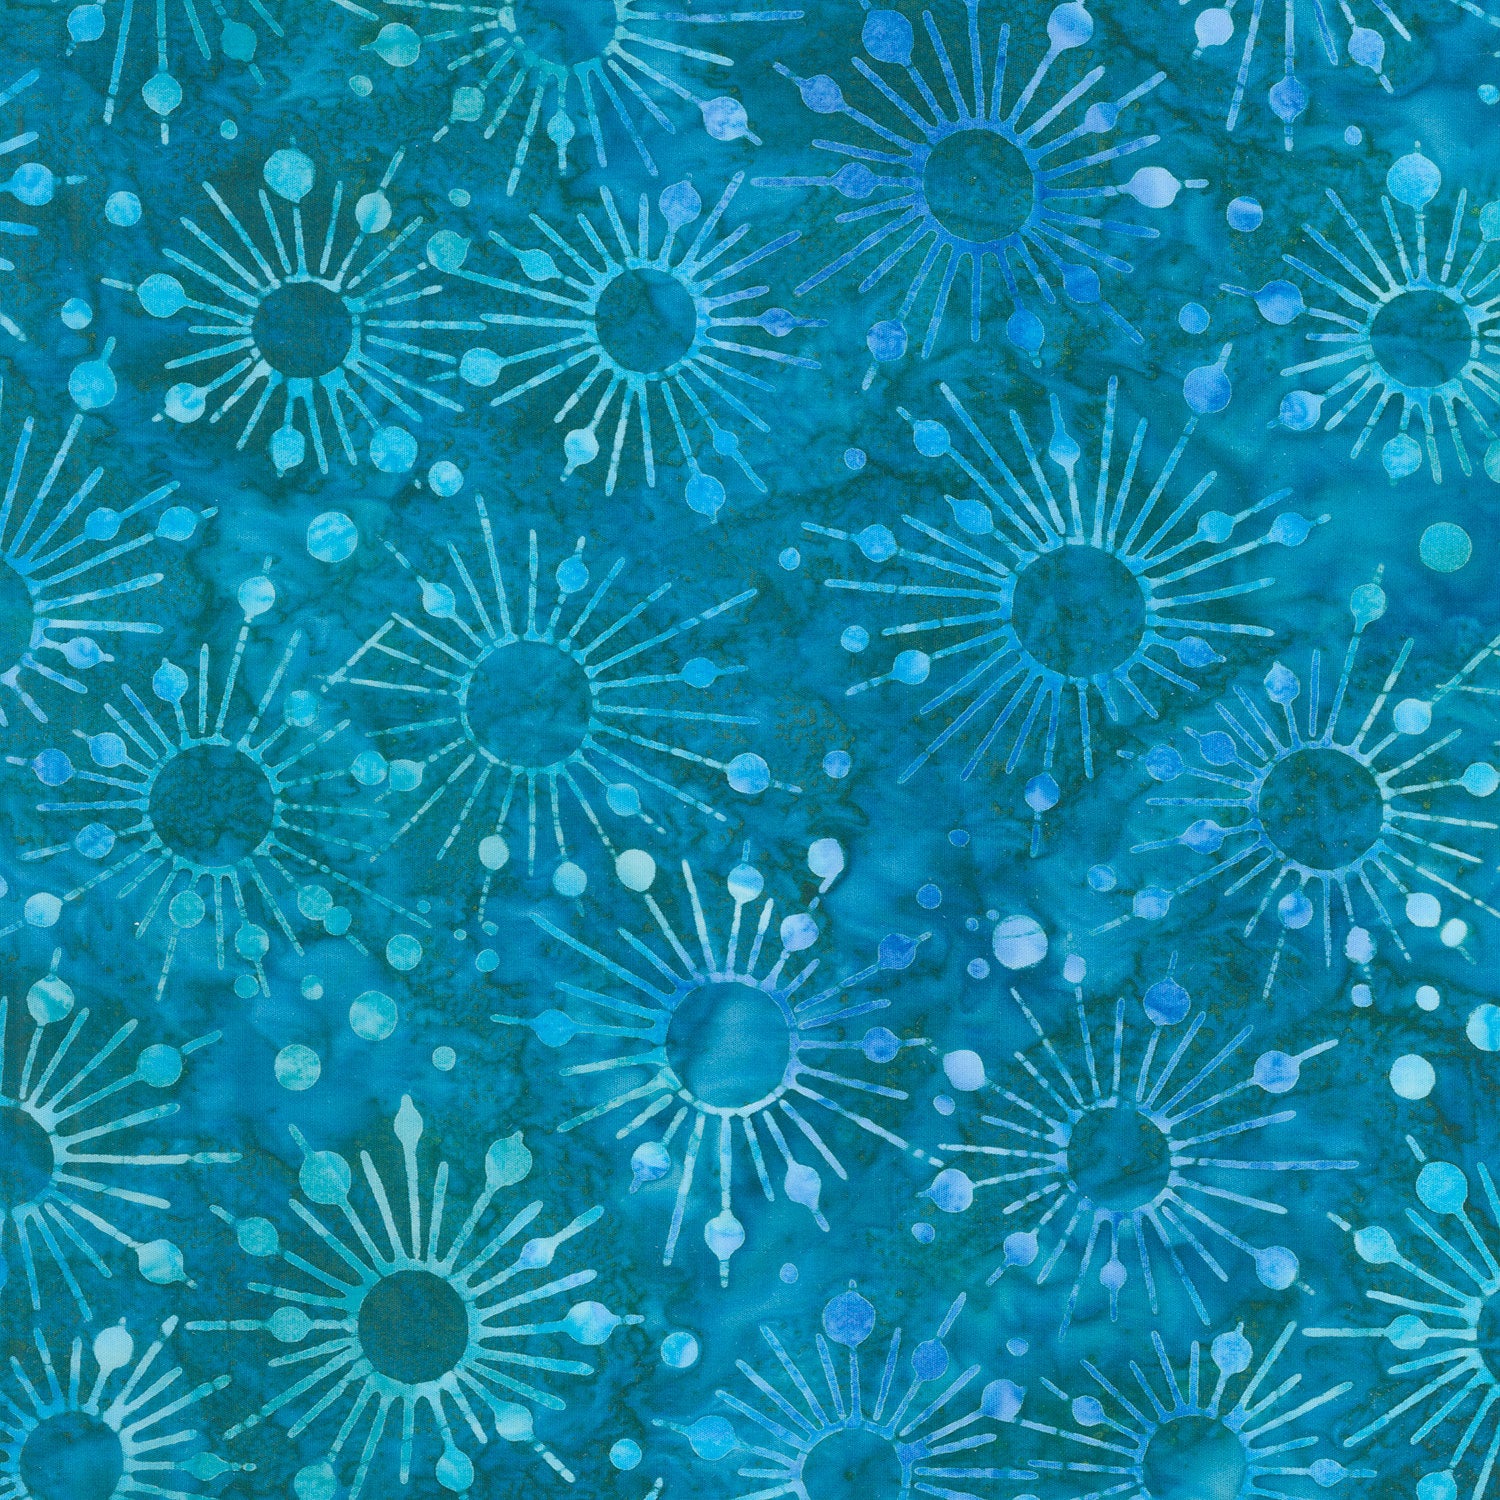 Hand Painted Batik Fabric Square - Swirling Star Flower in Teal